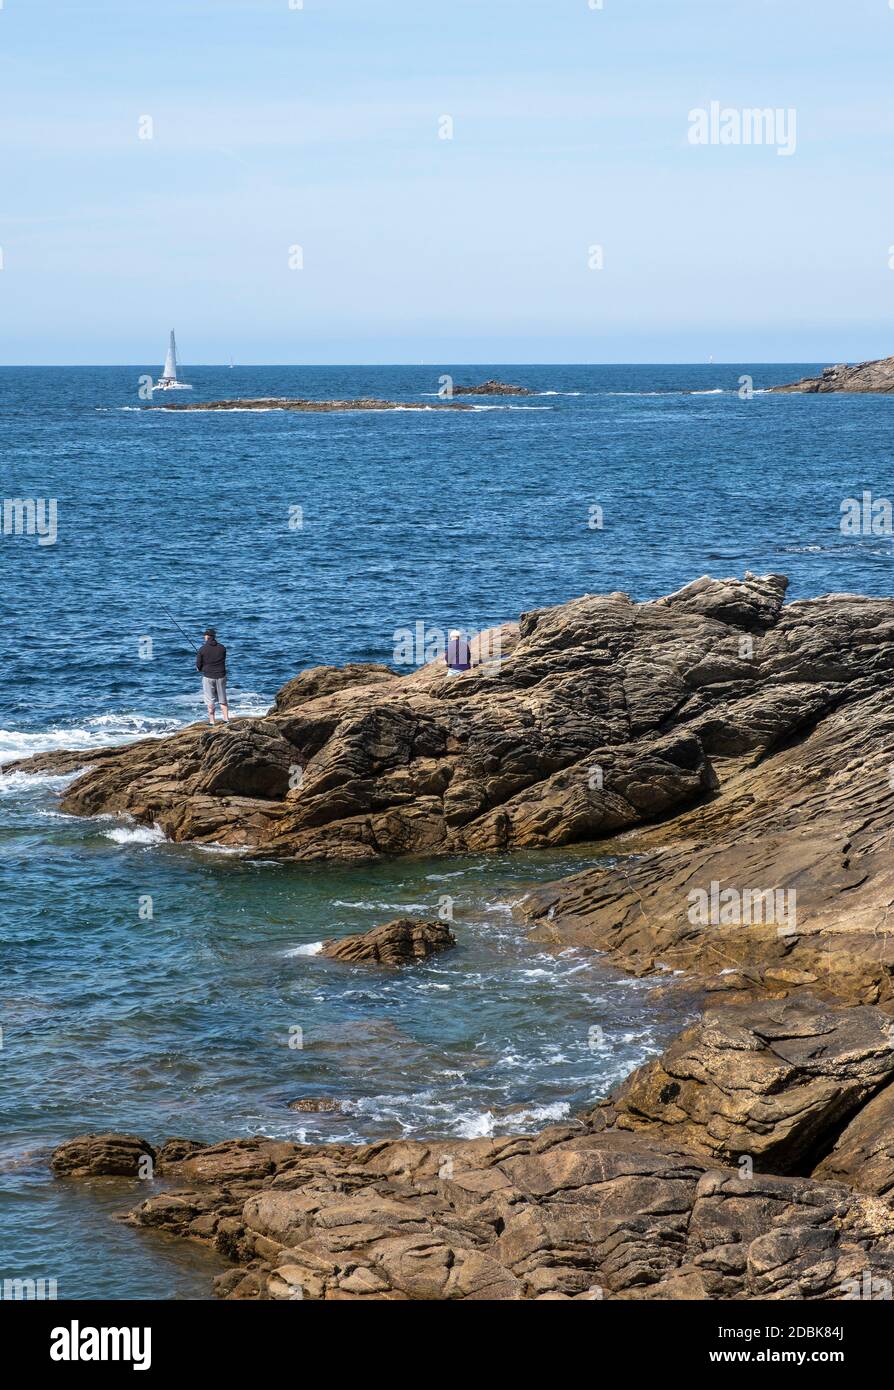 Man fishing on the rocks with a female companion and a yacht sailing past, at The Cote Sauvage on The Quiberon Peninsula, Brittany, France. Stock Photo